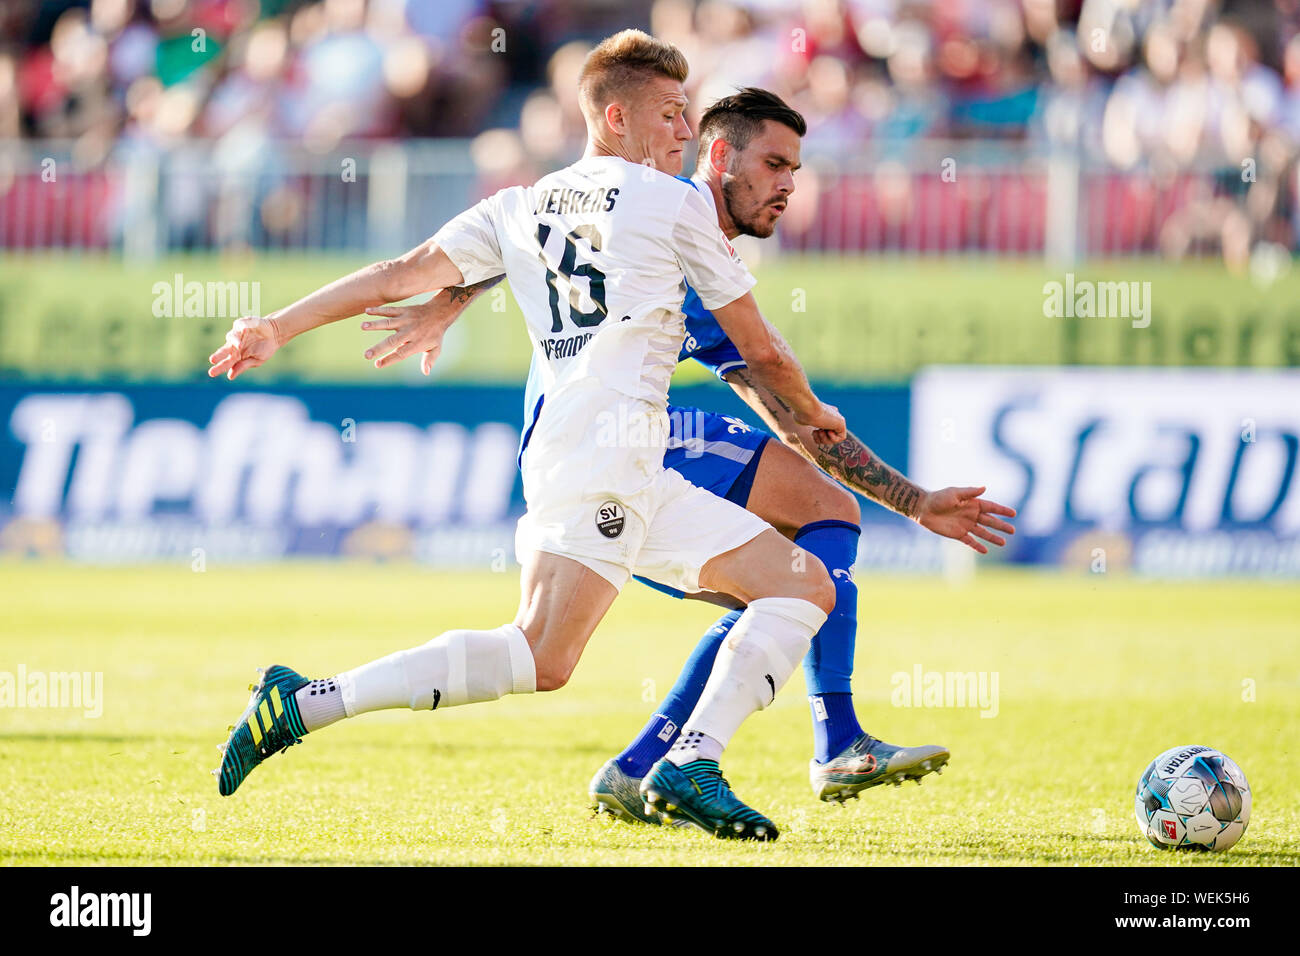 Sandhausen, Germany. 30th Aug, 2019. Soccer: 2nd Bundesliga, SV Sandhausen - SV Darmstadt 98, 5th matchday, in Hardtwaldstadion. Sandhausens Kevin Behrens (front) and Darmstadts Dario Dumic fight for the ball. Credit: Uwe Anspach/dpa - IMPORTANT NOTE: In accordance with the requirements of the DFL Deutsche Fußball Liga or the DFB Deutscher Fußball-Bund, it is prohibited to use or have used photographs taken in the stadium and/or the match in the form of sequence images and/or video-like photo sequences./dpa/Alamy Live News Stock Photo